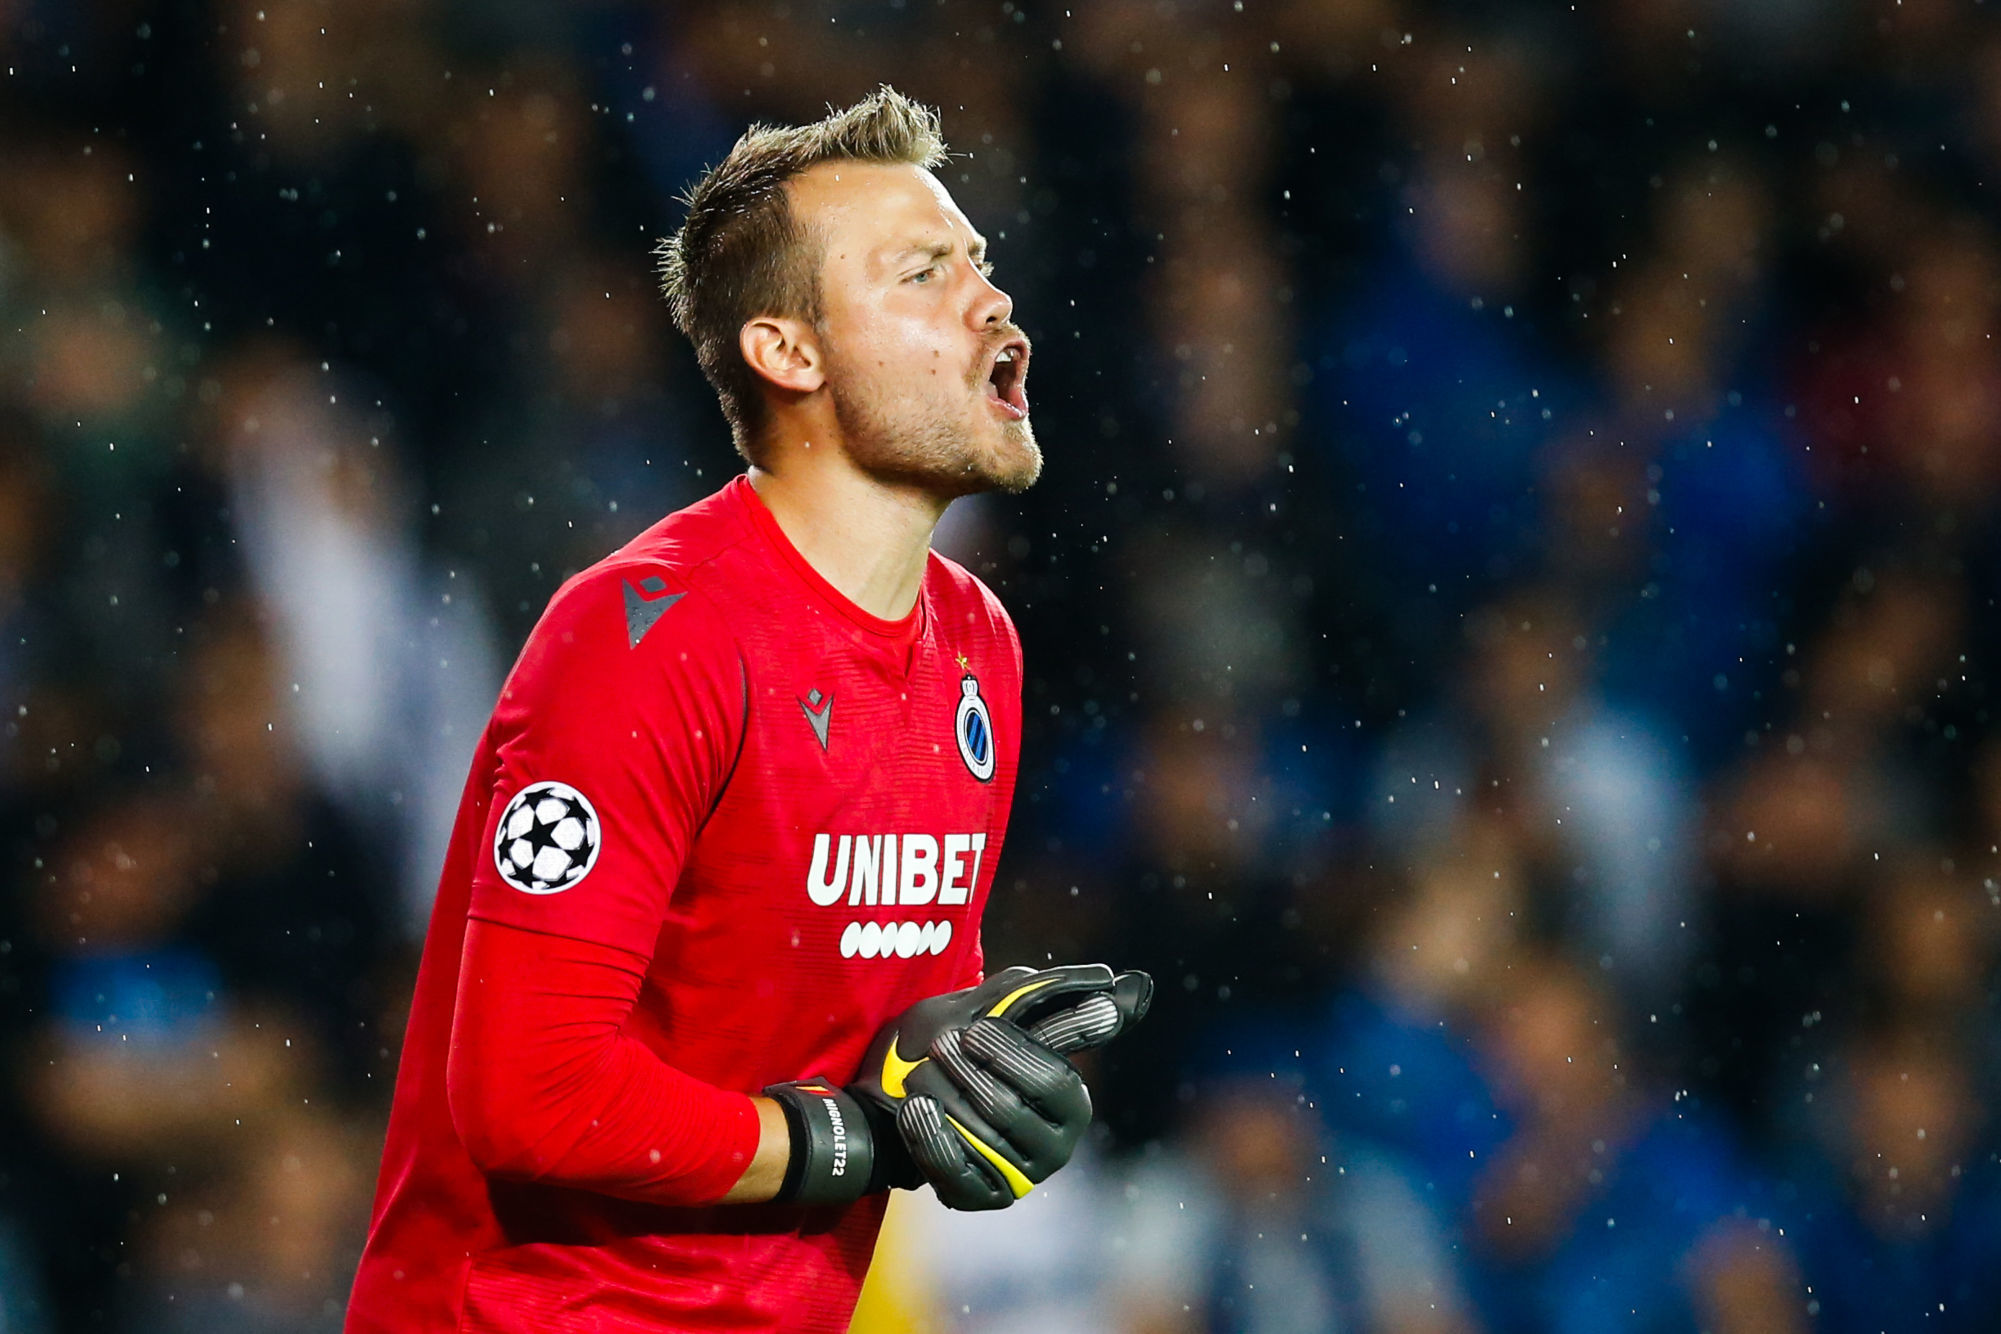 Club's goalkeeper Simon Mignolet pictured during a game between Belgian soccer team Club Brugge and Austrian club LASK Linz, Wednesday 28 August 2019 in Brugge, the return match in the play-offs of the UEFA Champions League, after a 0-1 victory of Club in the first leg.
Photo : Belga / Icon Sport